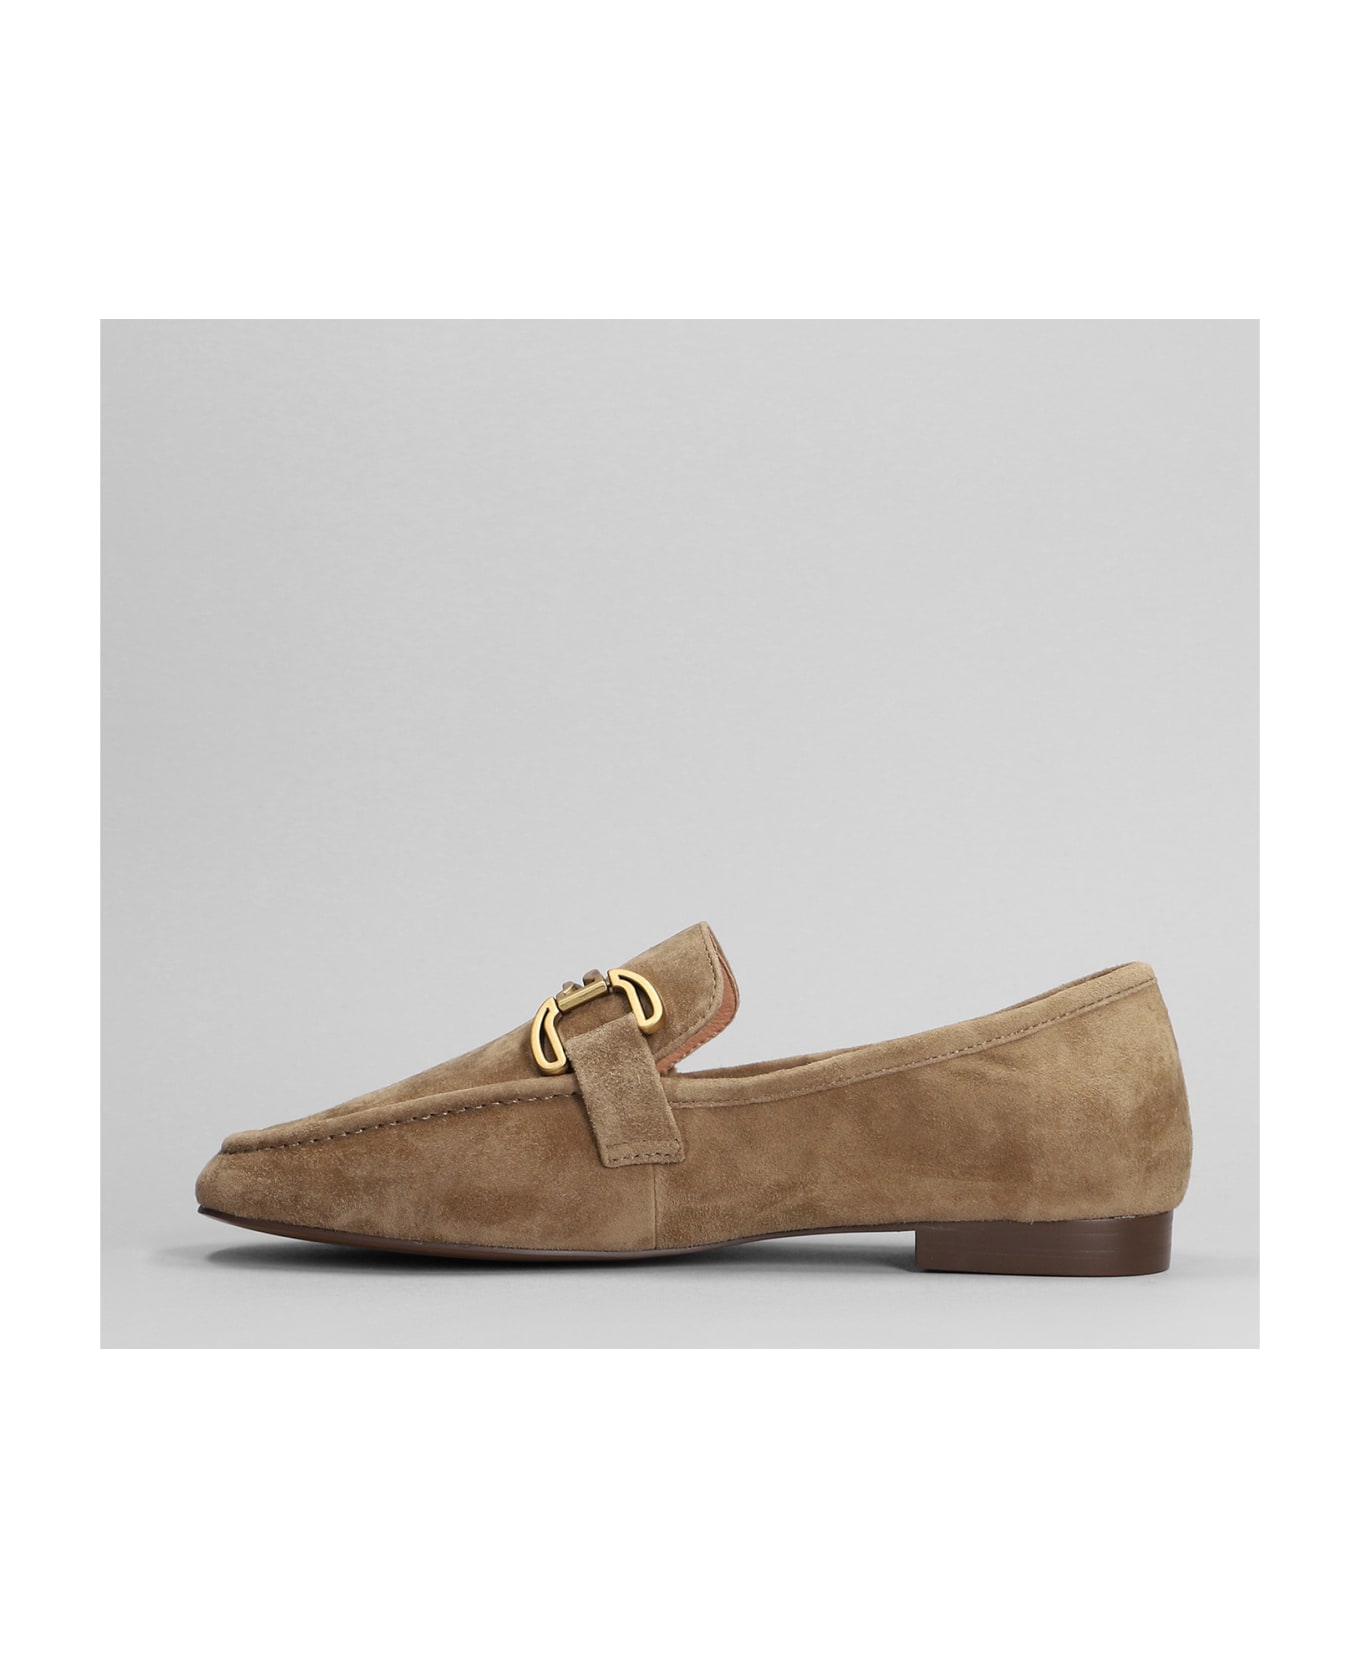 Bibi Lou Zagreb Ii Loafers In Taupe Suede - taupe